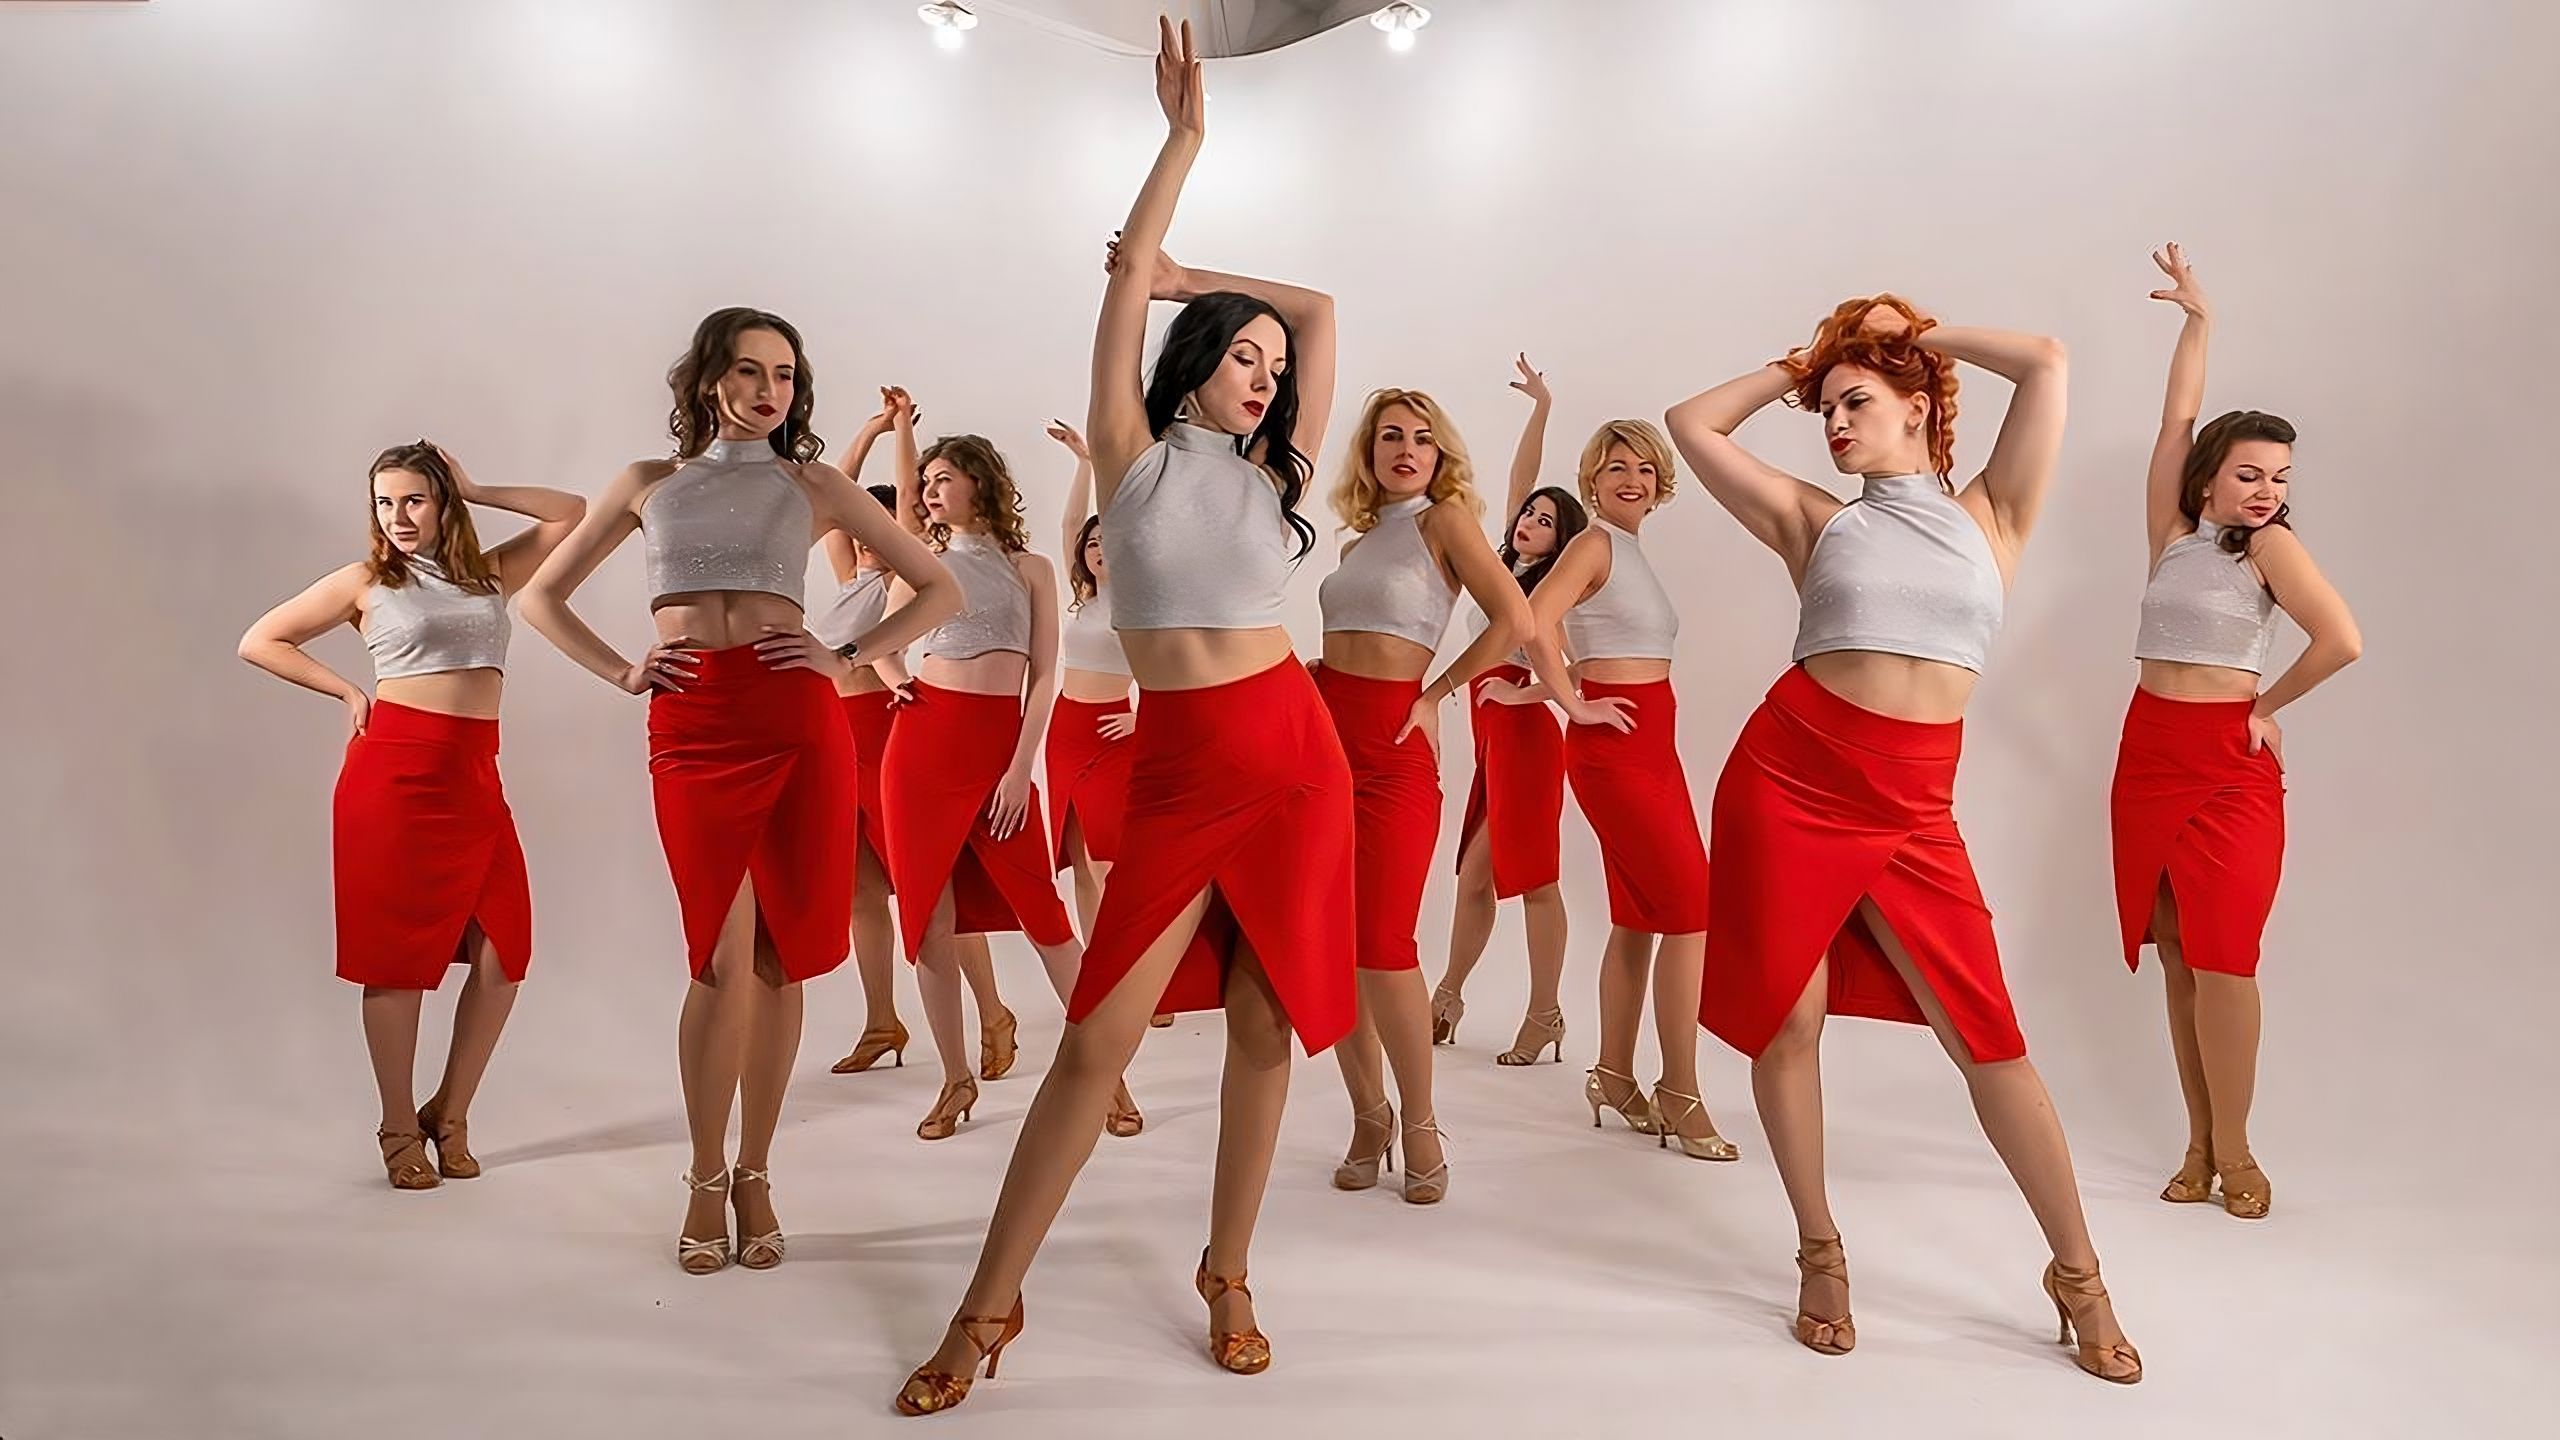 Women in red skirts and while tops posing beautifully on a white stage